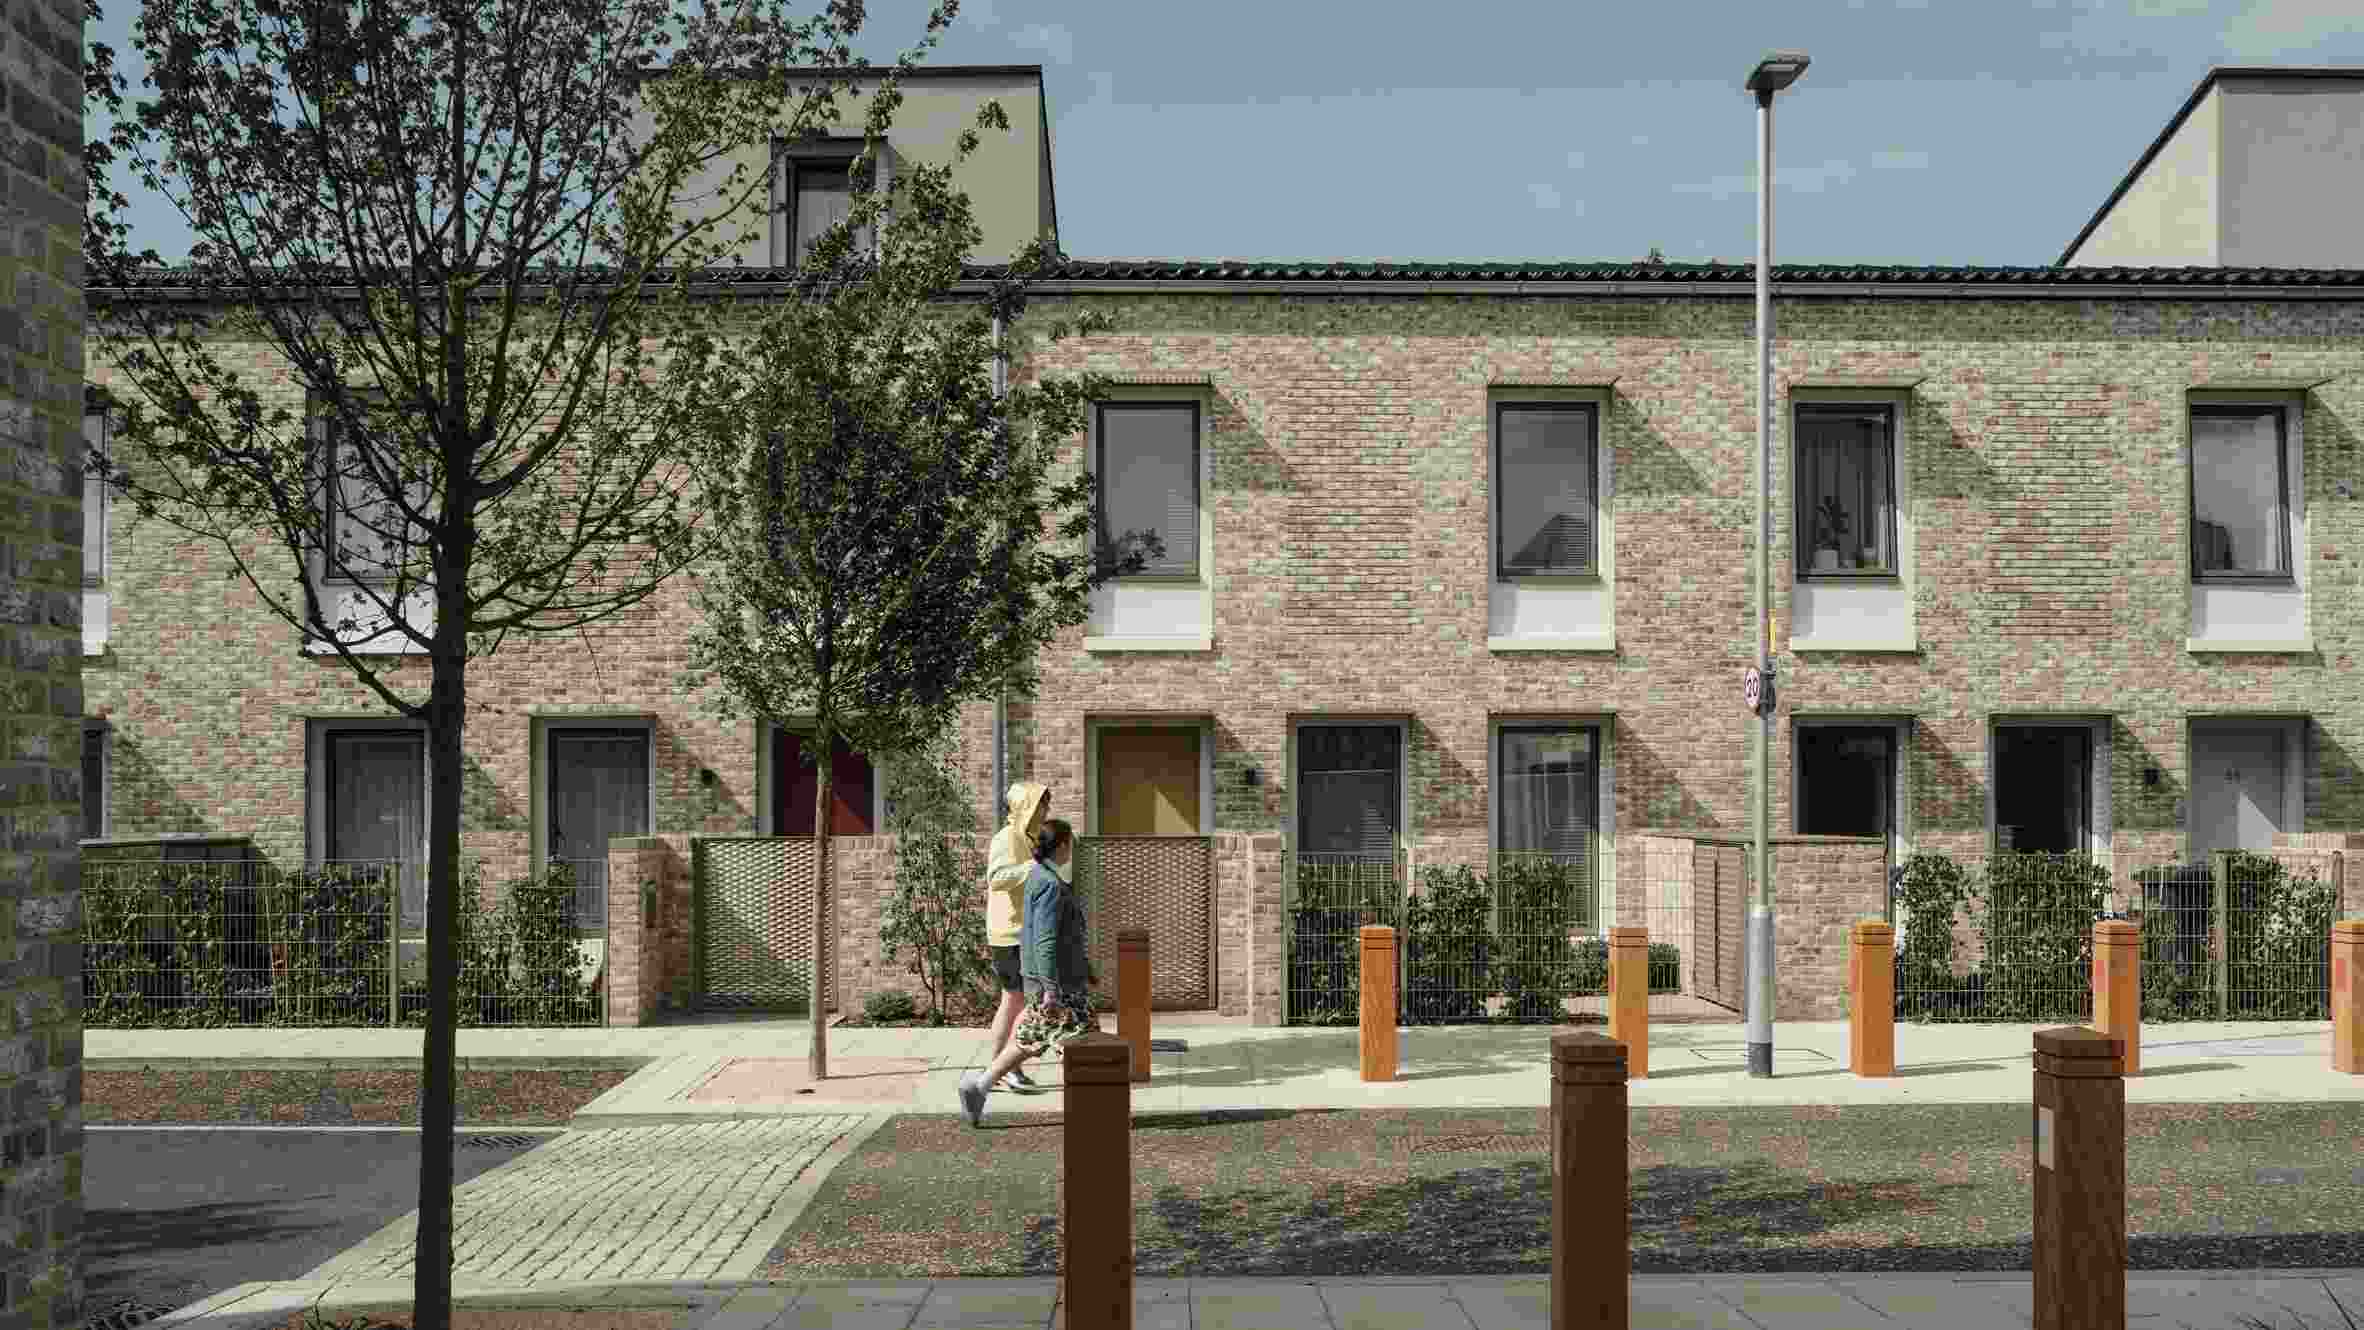 goldsmith street mikhail riches architecture residential social housing norwich uk england dezeen 2364 hero2 compressed